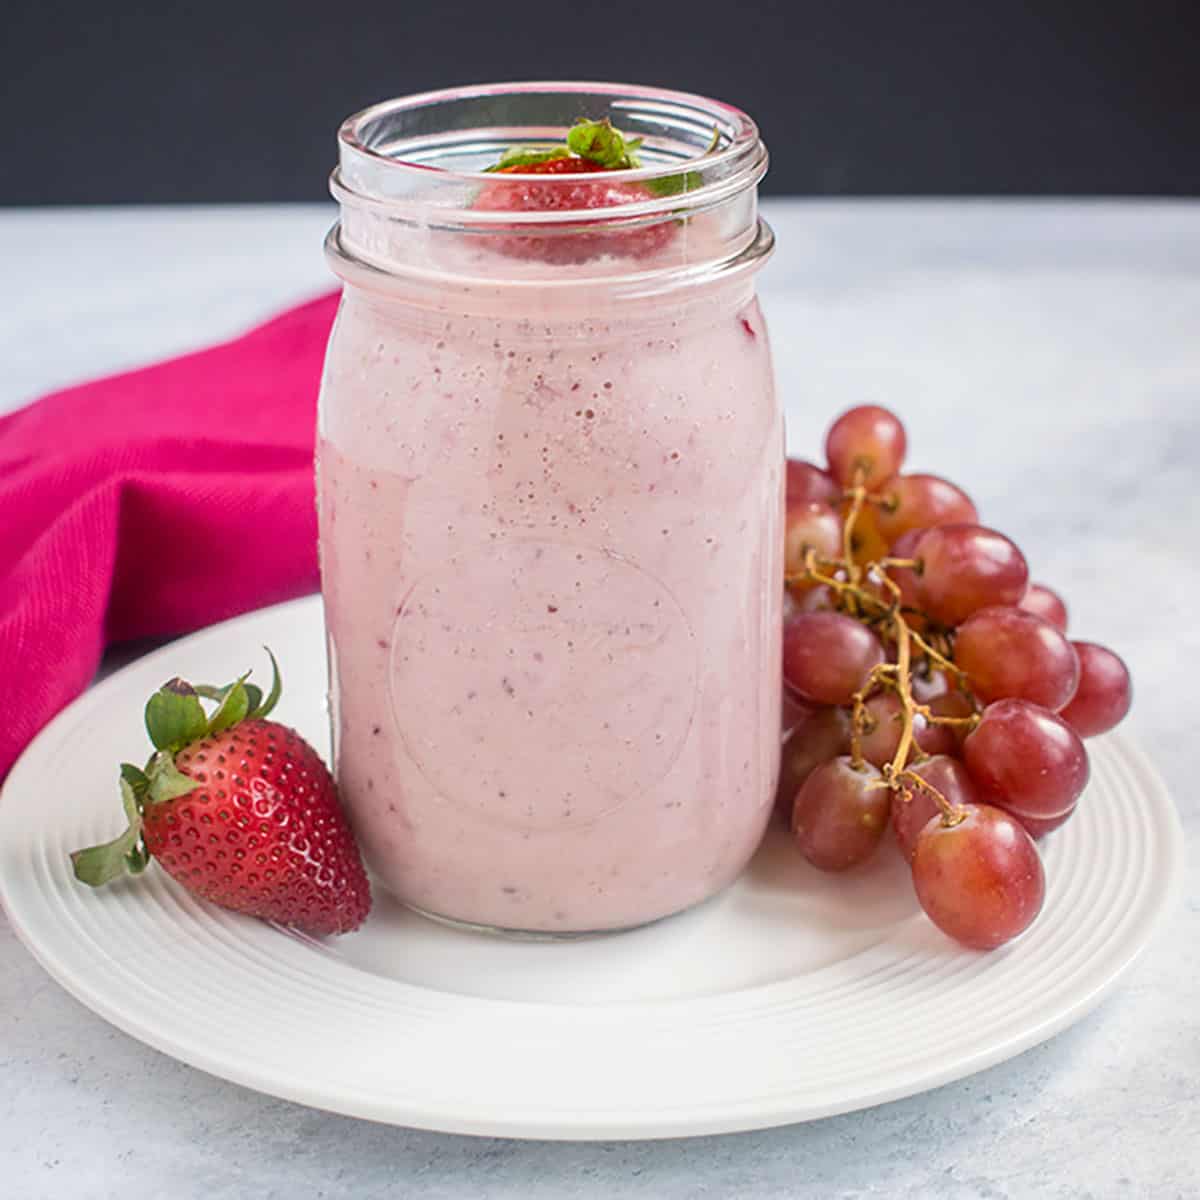 Get How To Make A Strawberry Smoothie Without Yogurt Pics